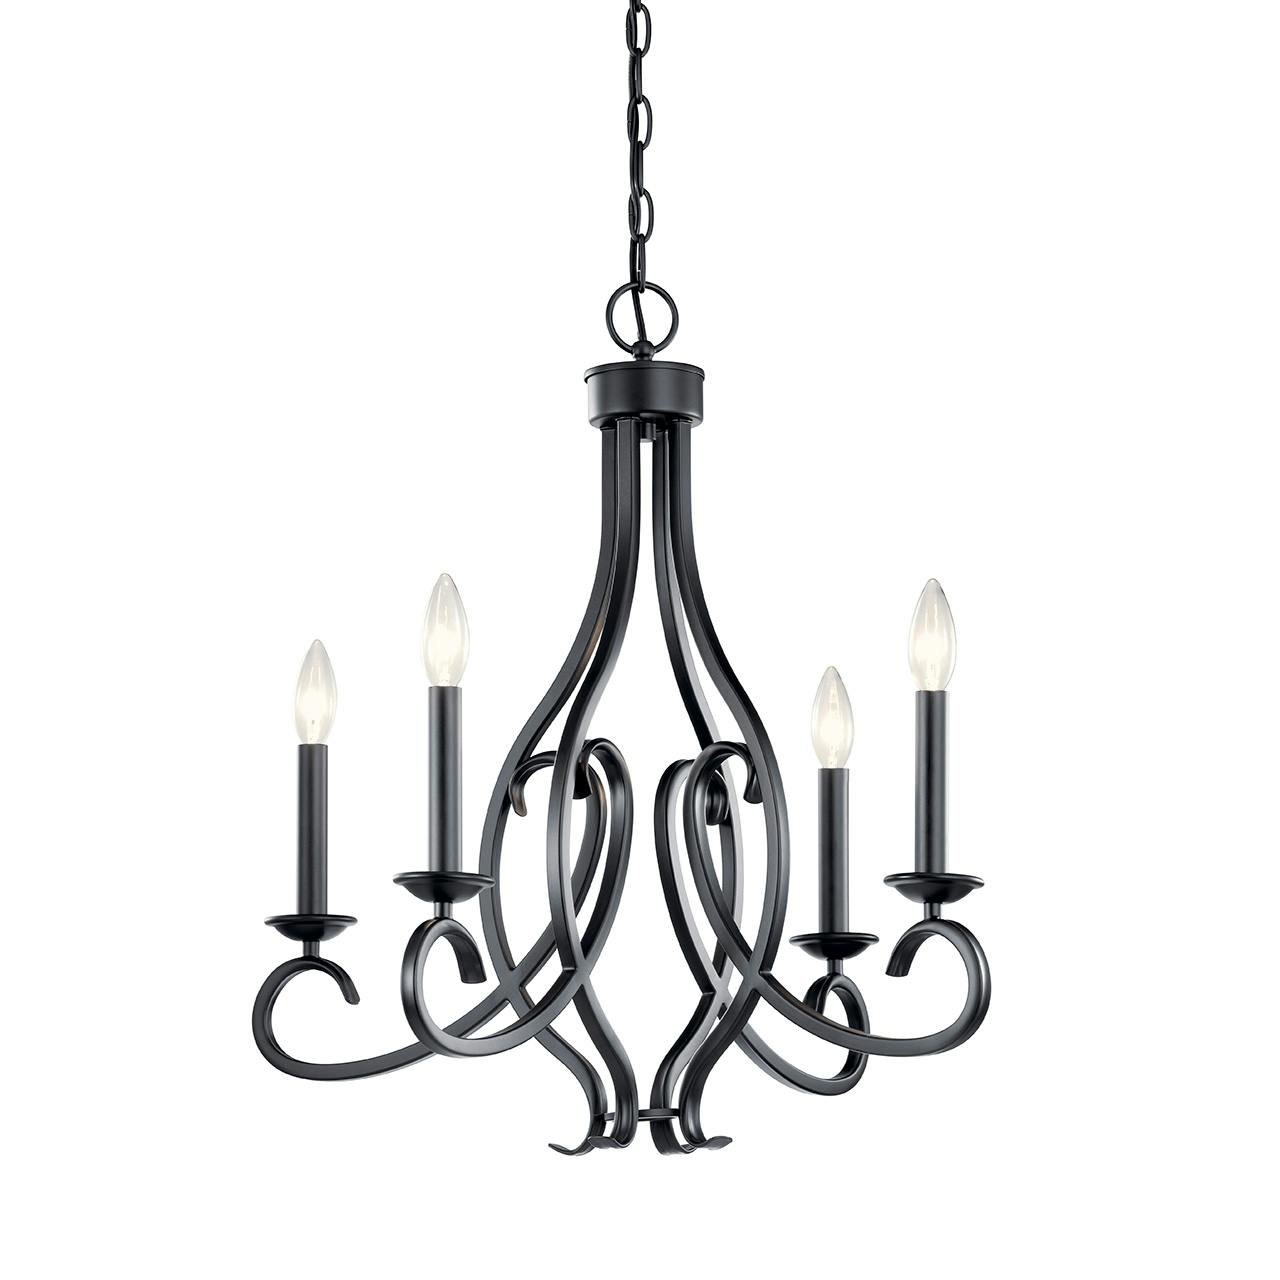 Ania 4 Light Chandelier in Black without the canopy on a white background